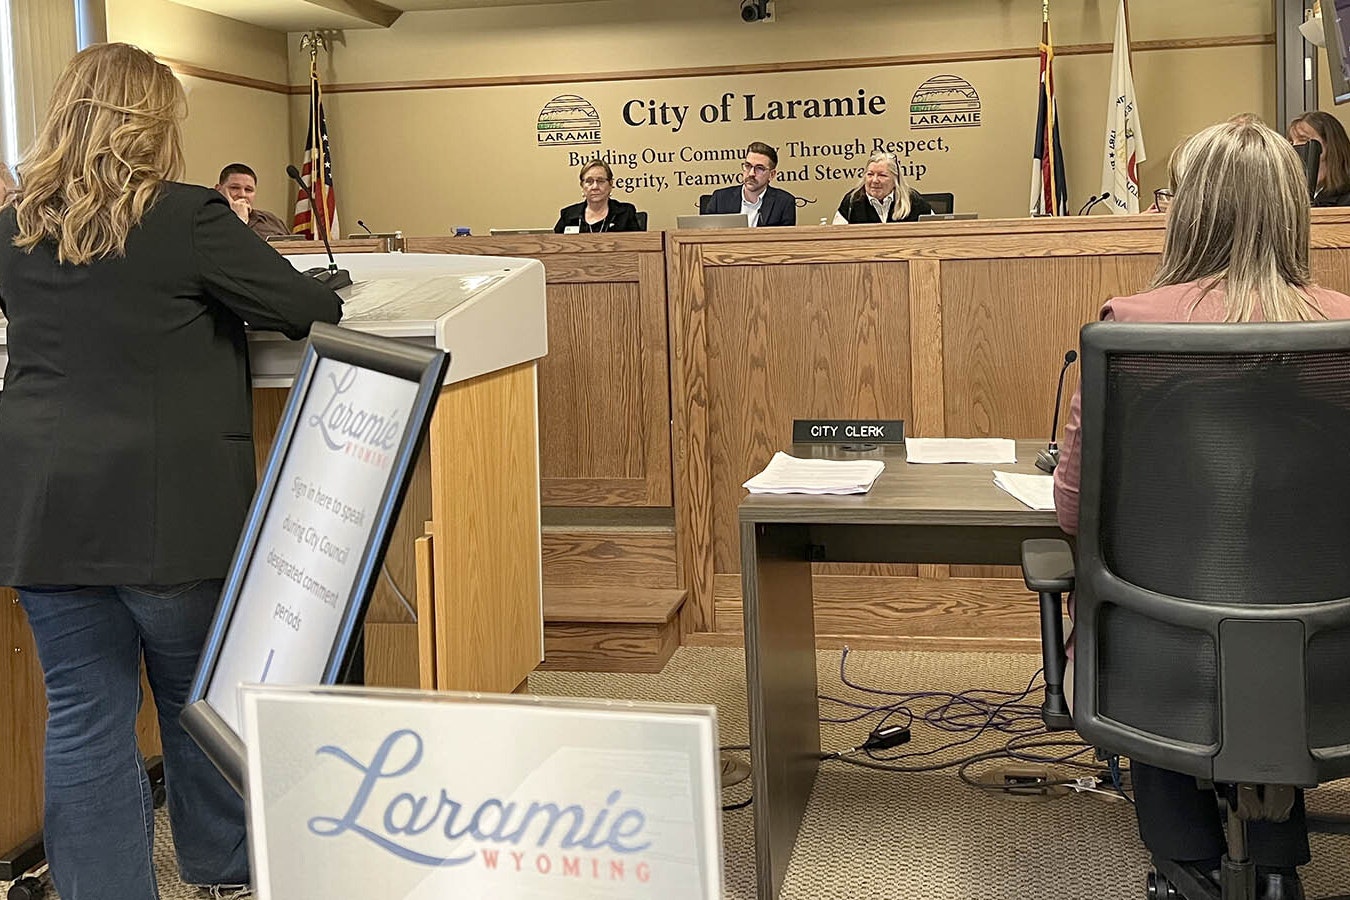 More than 30 people testified against a proposed apartment building in downtown Laramie before the city council late Tuesday. The council voted to kill the project.